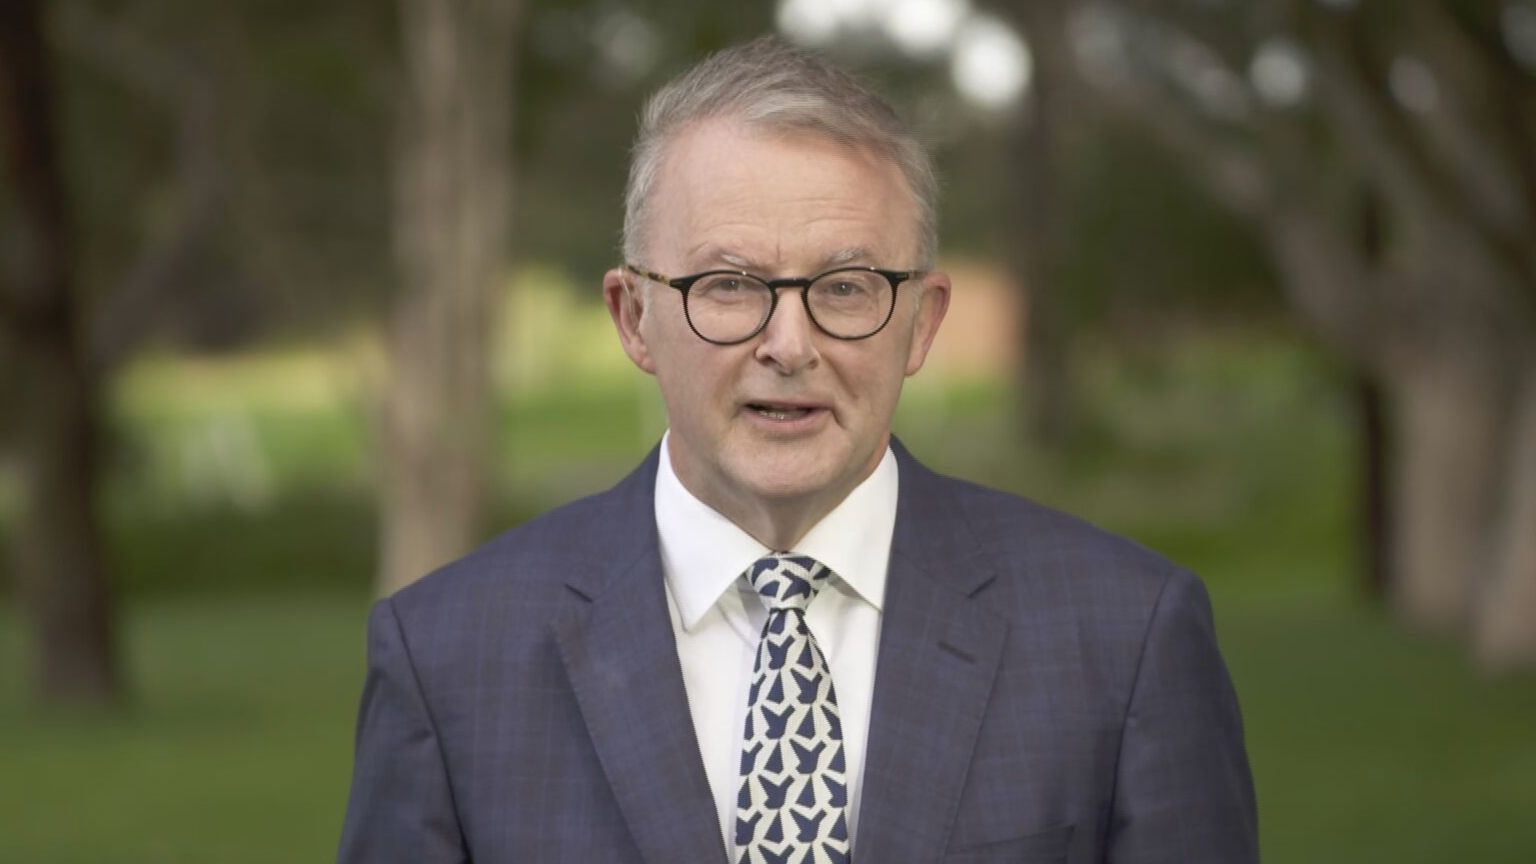 The question that stumped Anthony Albanese